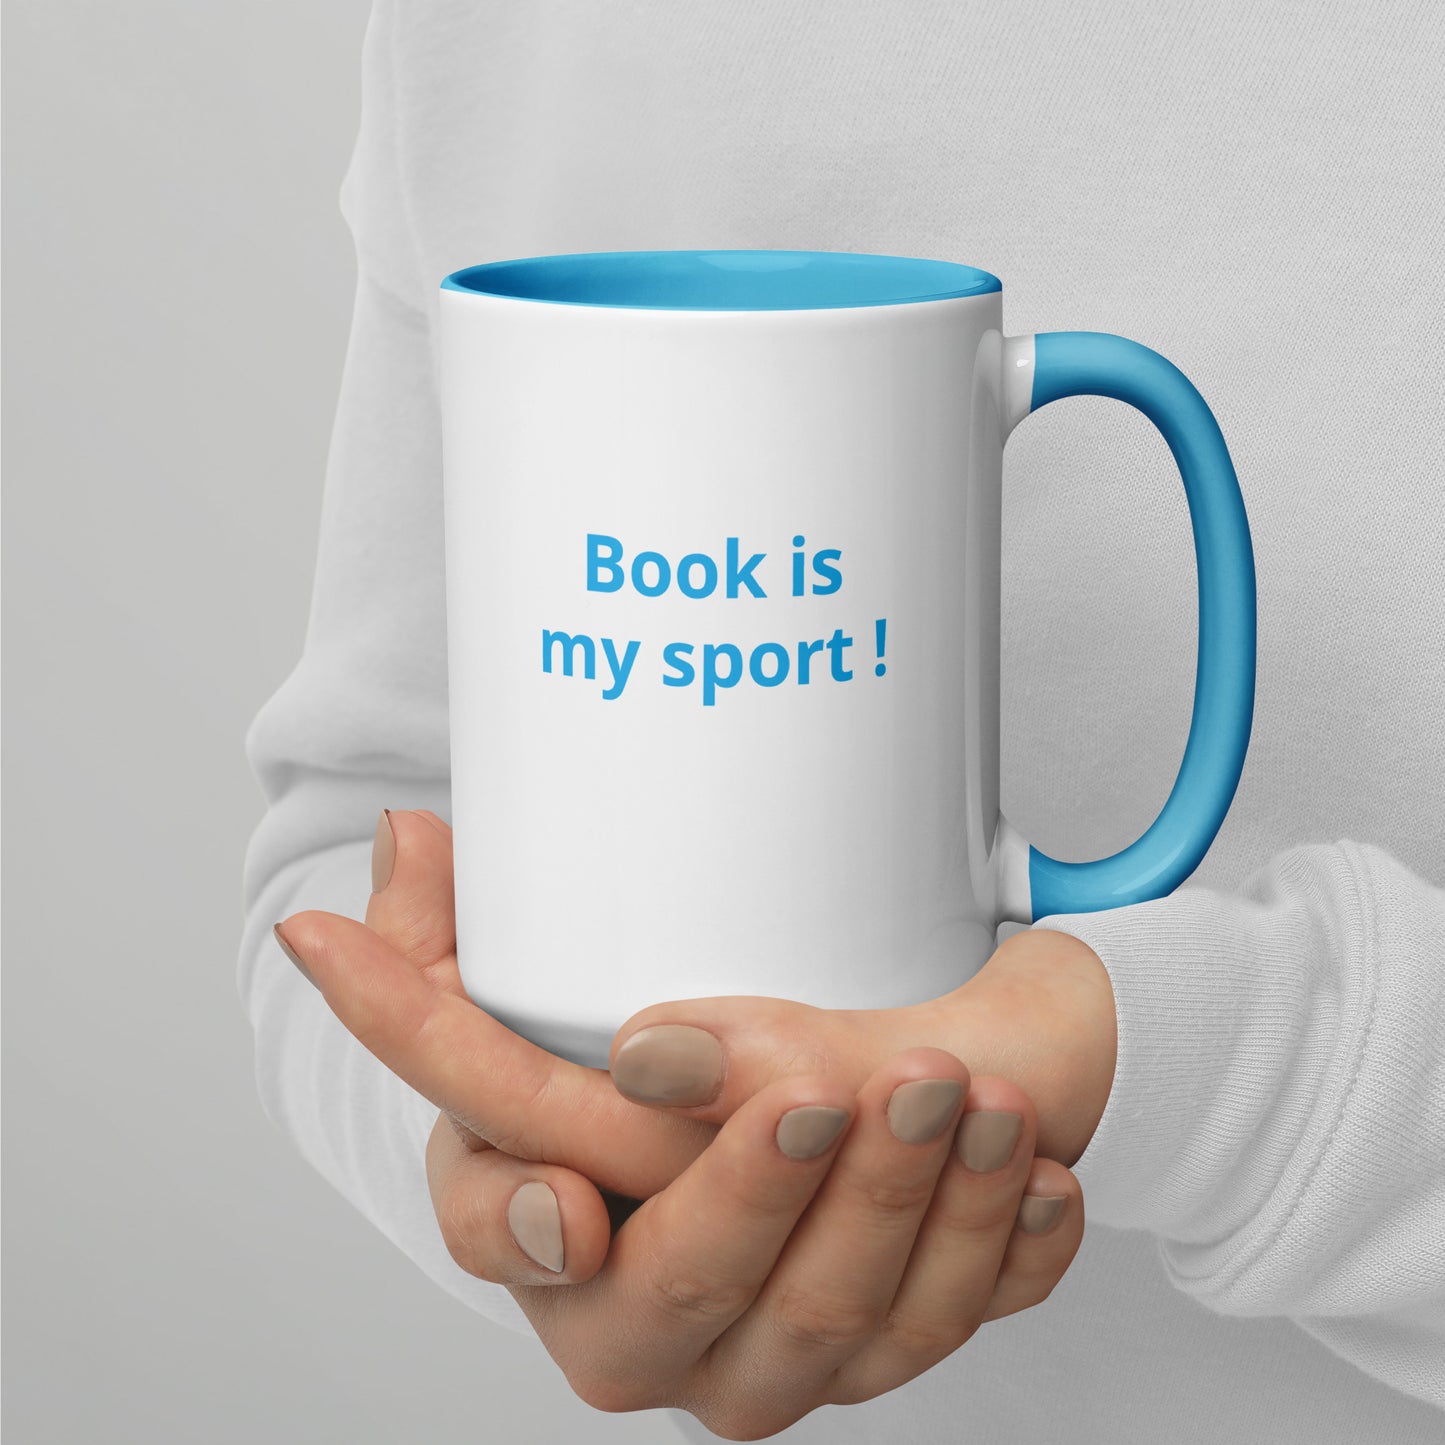 Book is my sport !